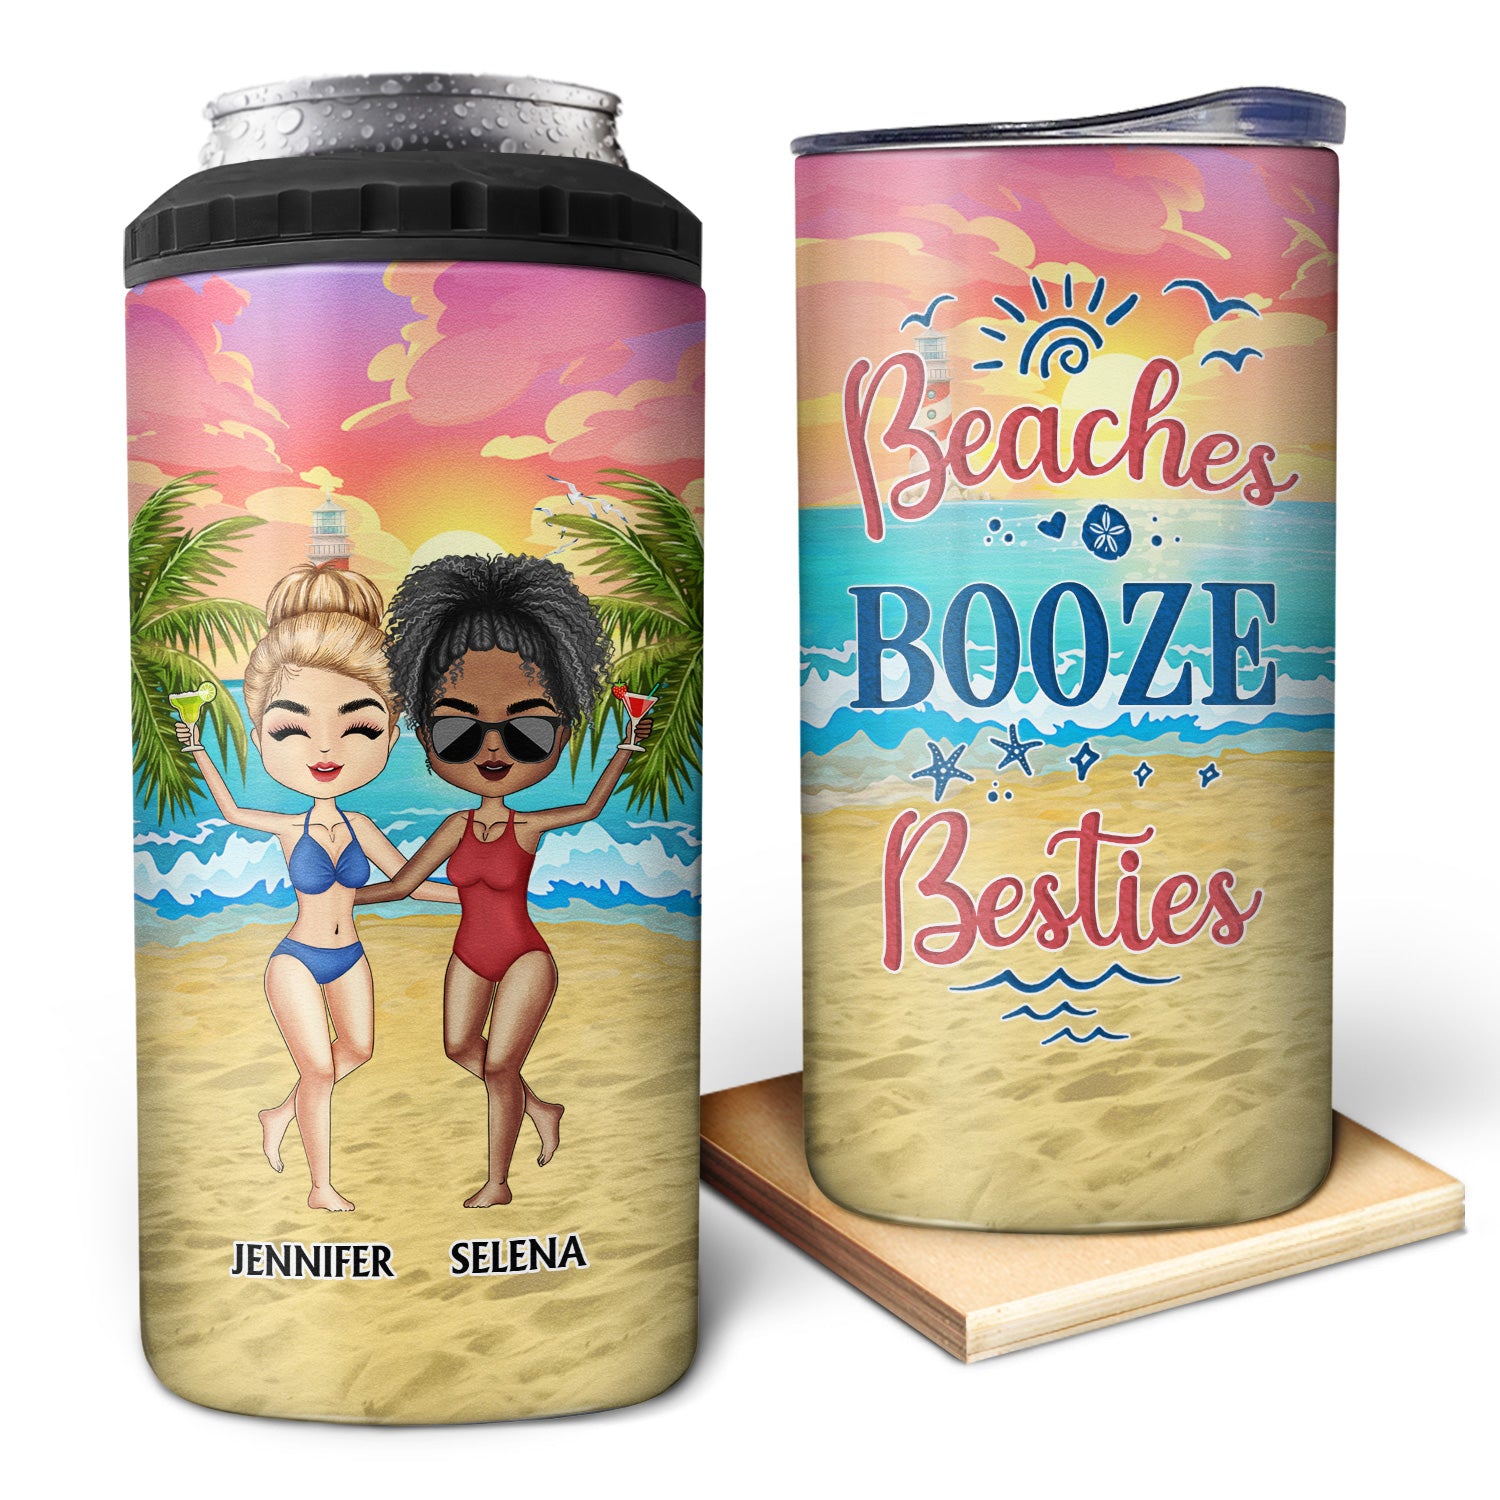 Beaches Booze Besties Best Friends - Gift For BFF, Siblings, Colleagues - Personalized Custom 4 In 1 Can Cooler Tumbler